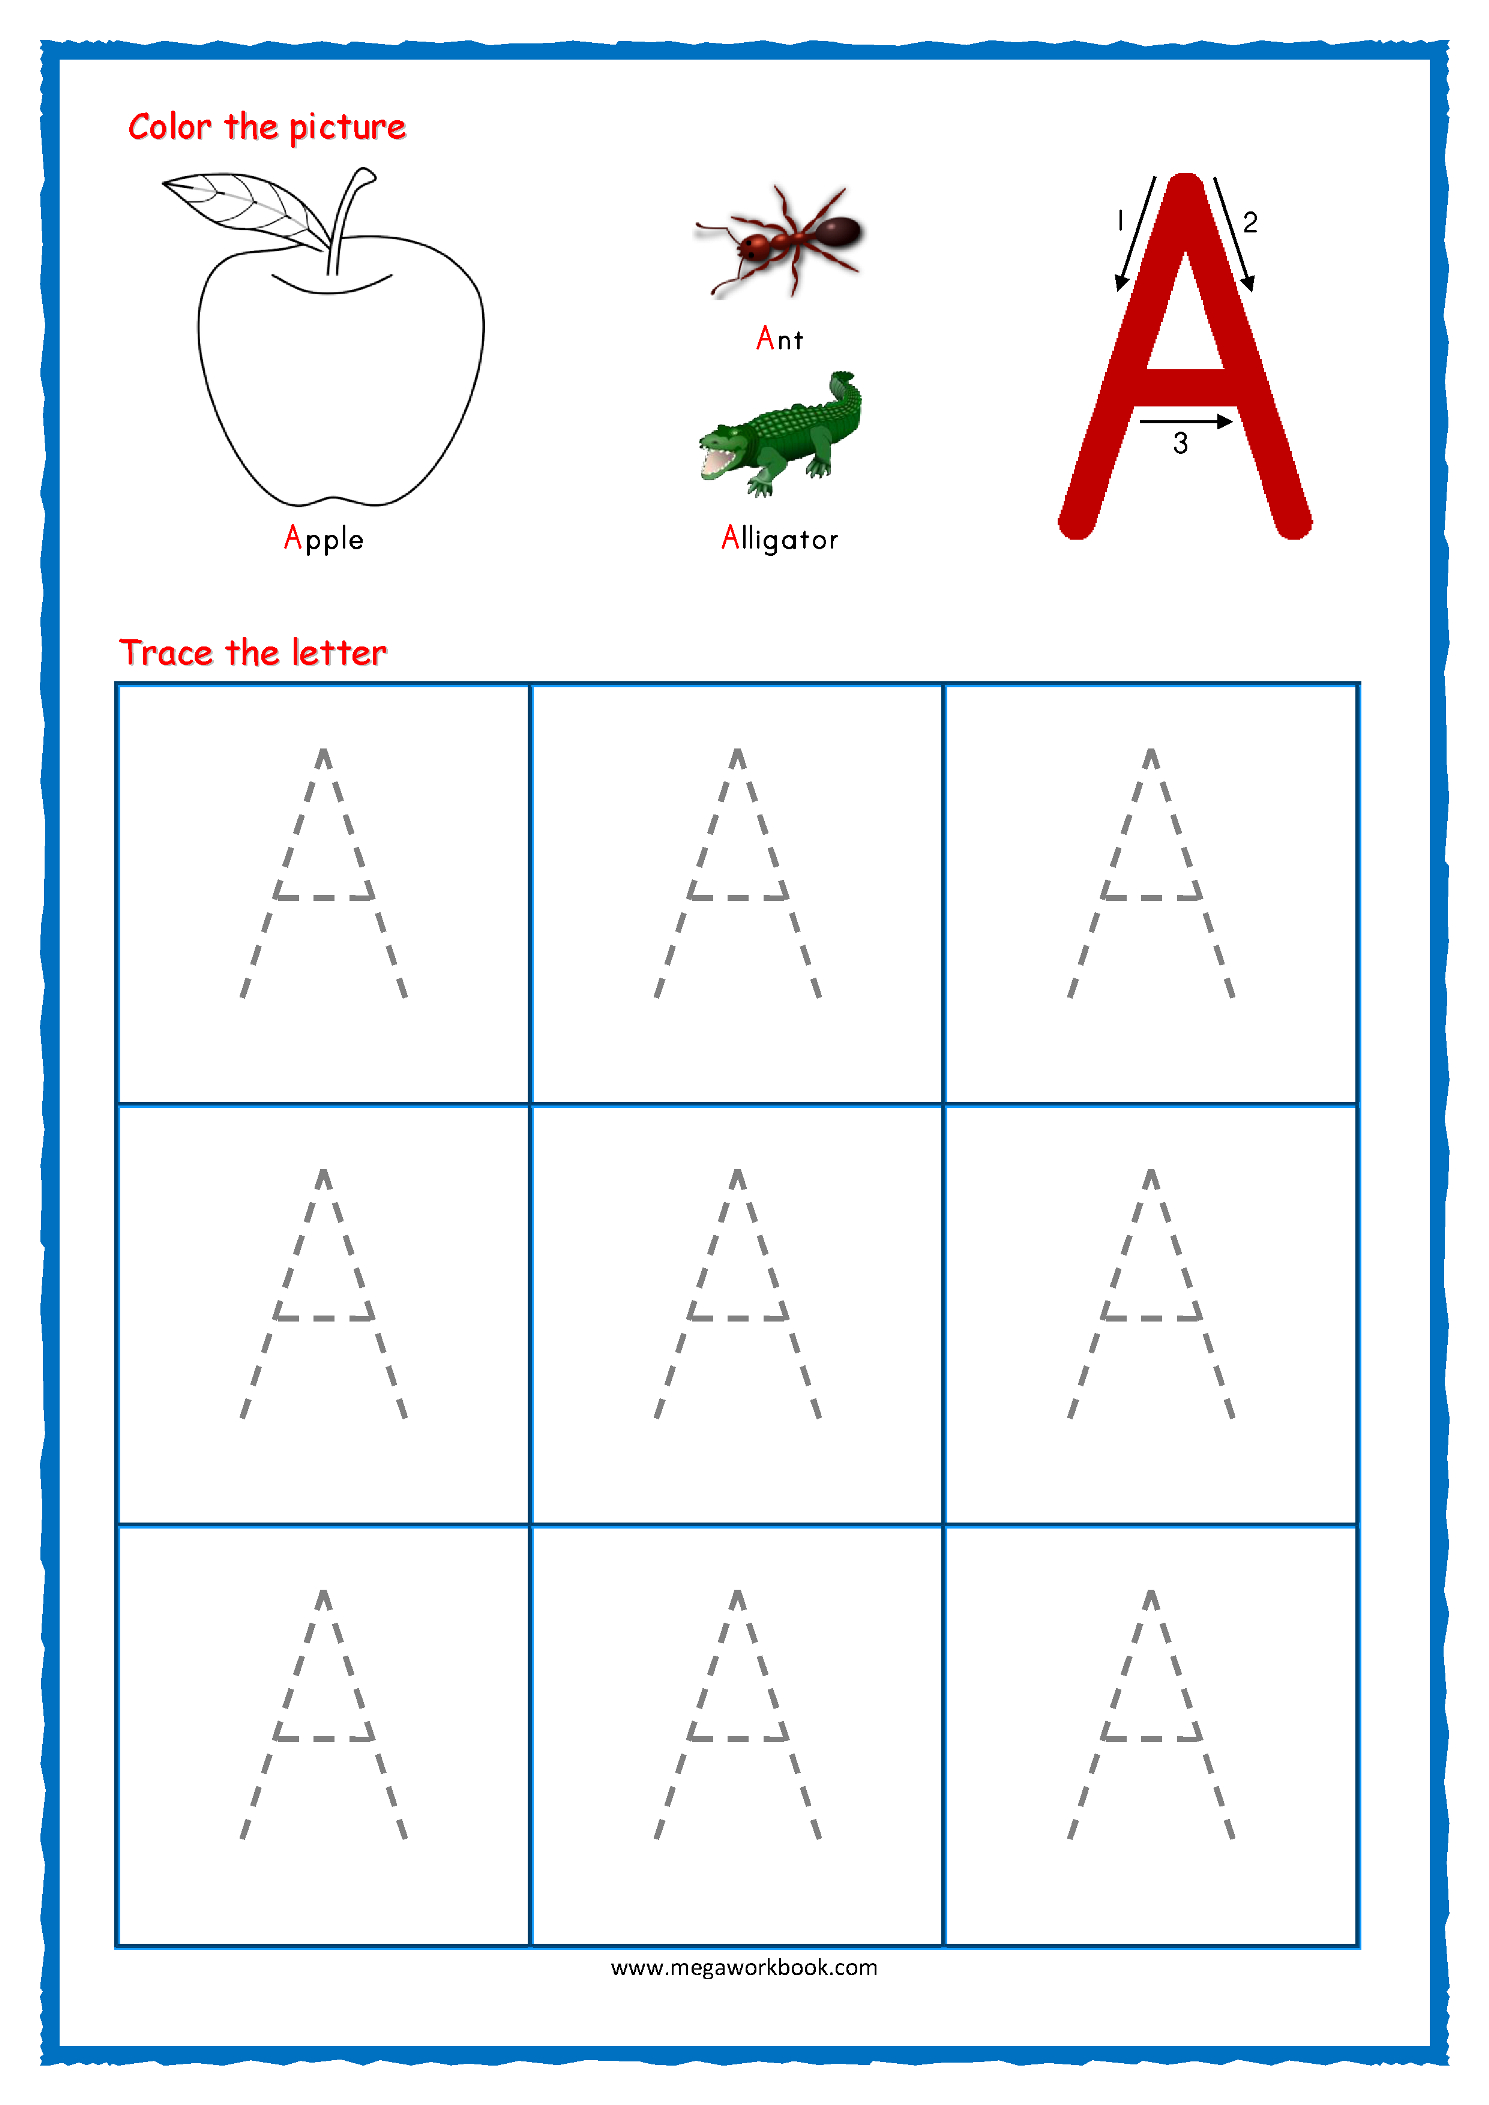 Coloring Book : Free Printable Alphabet Tracing Sheets in Large Tracing Letters